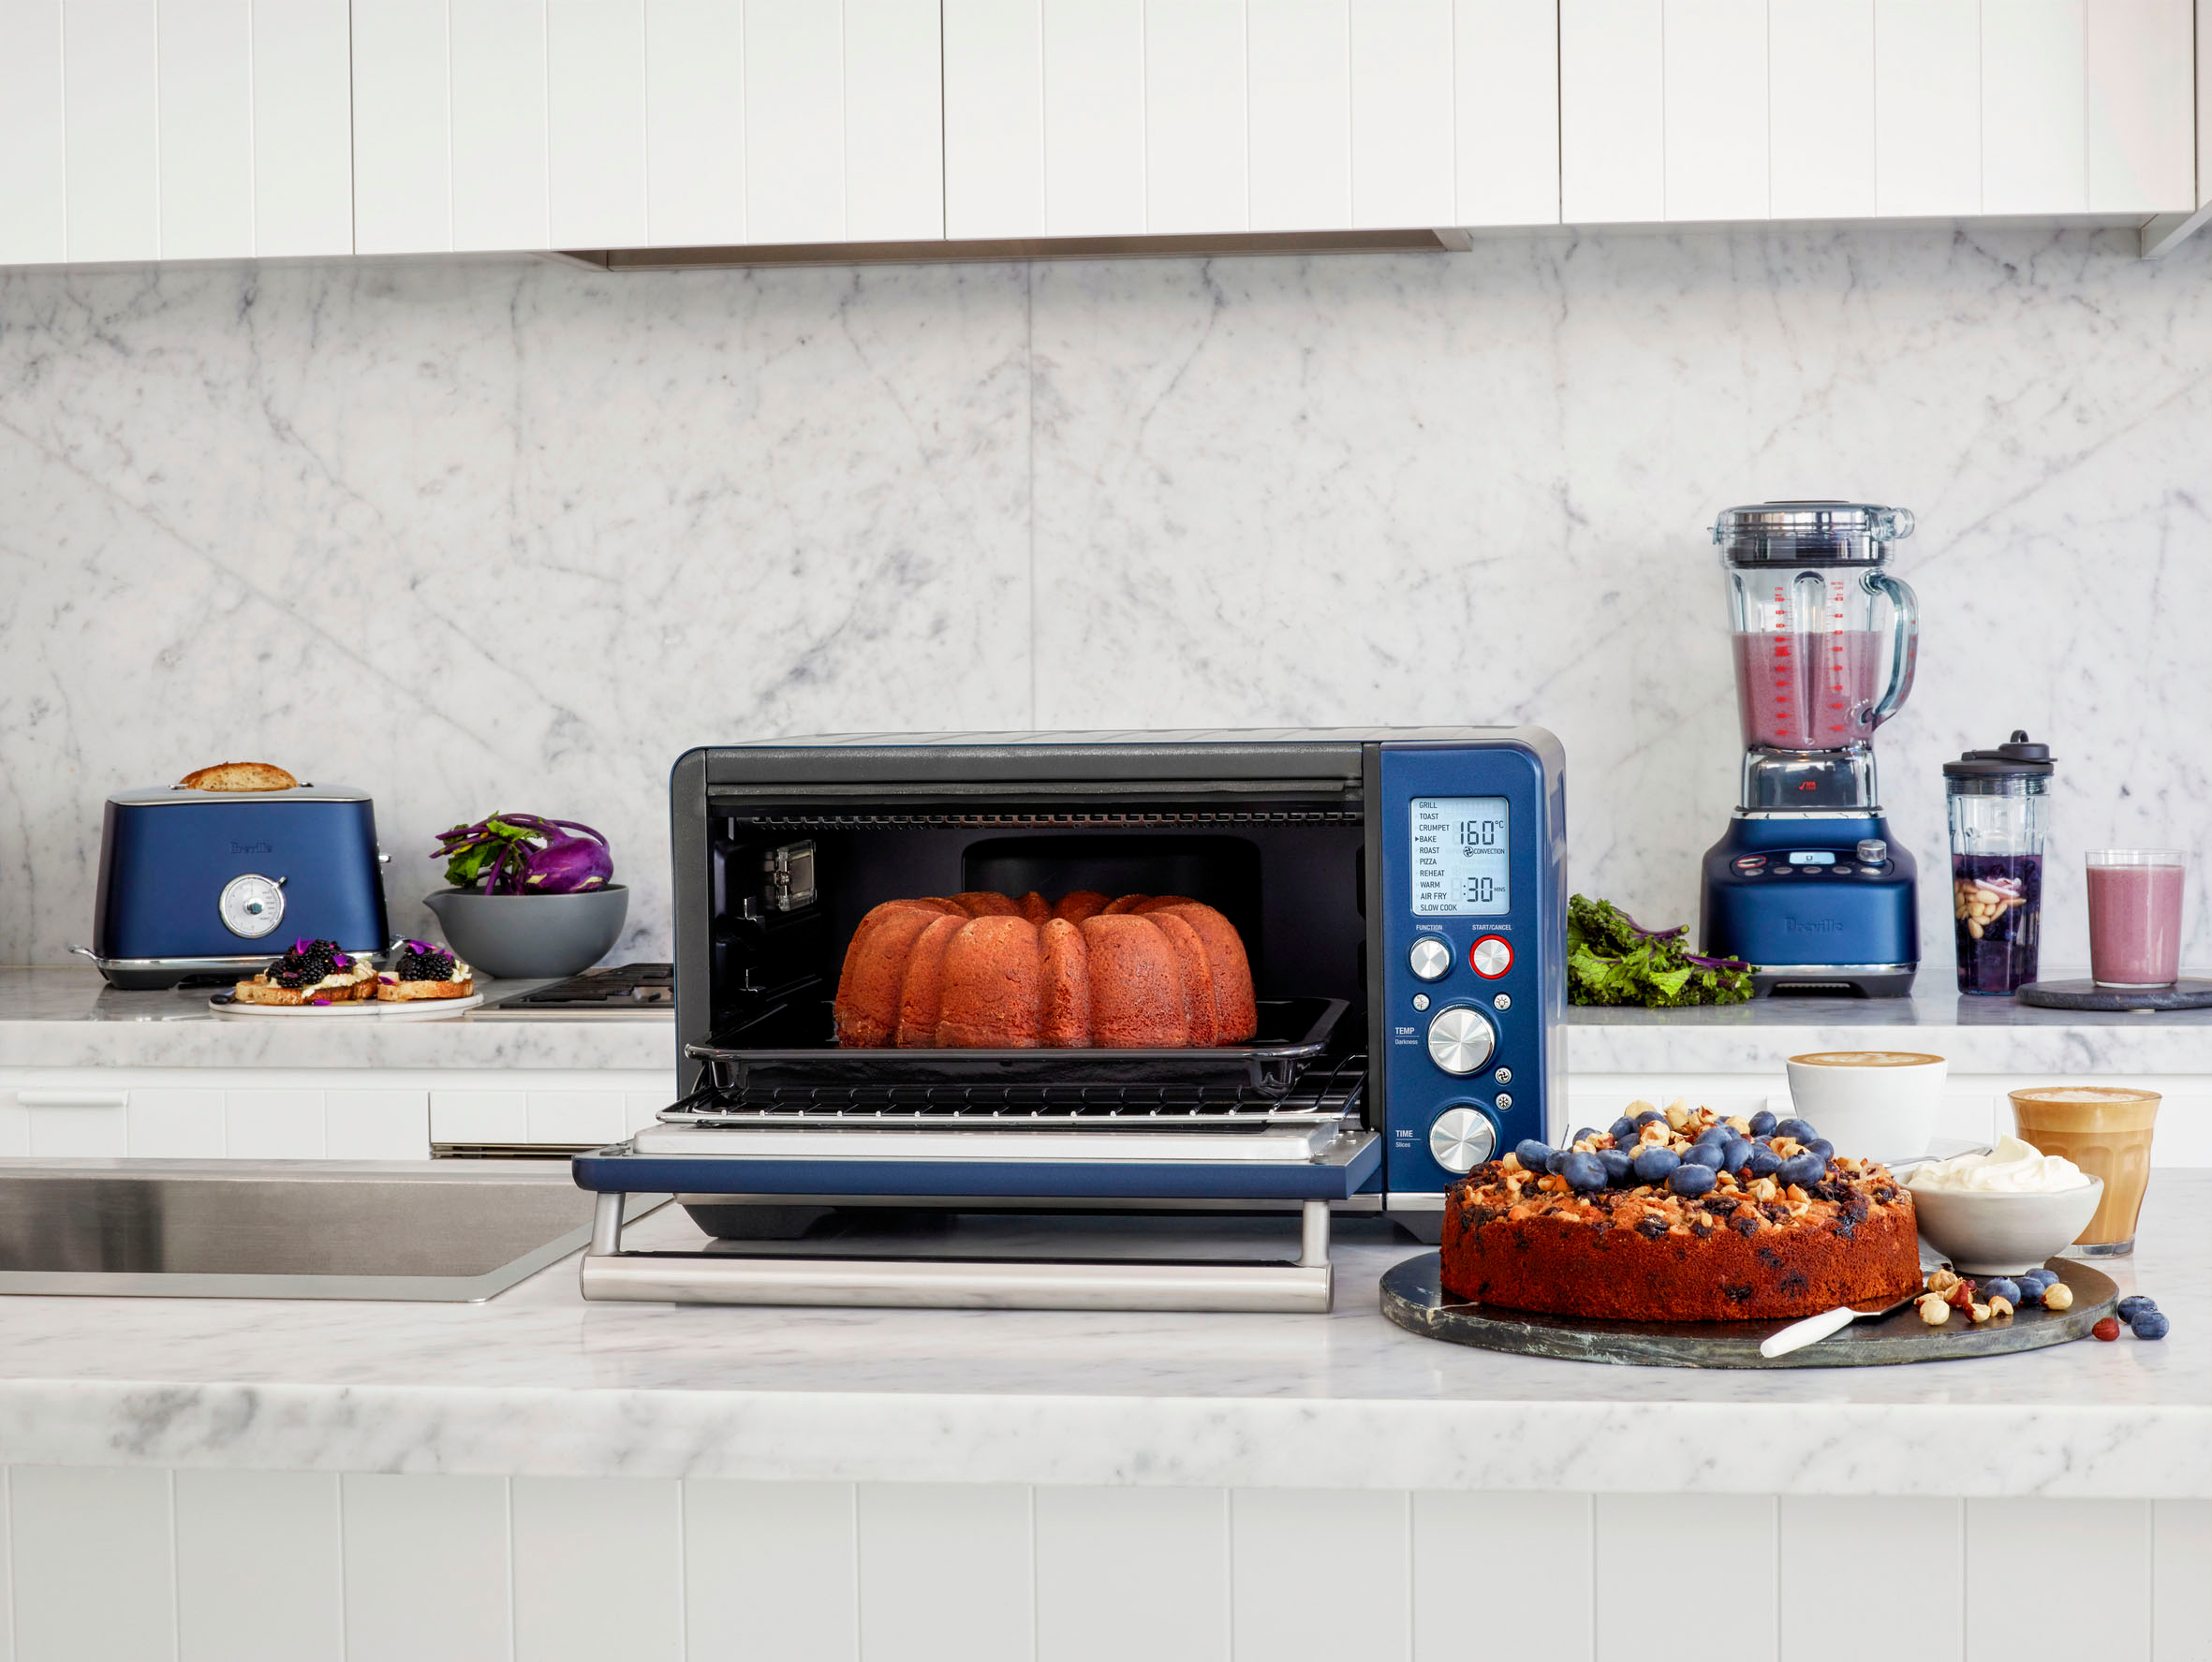 Breville Air Fryer on Sale at Best Buy That Can Cook a Turkey